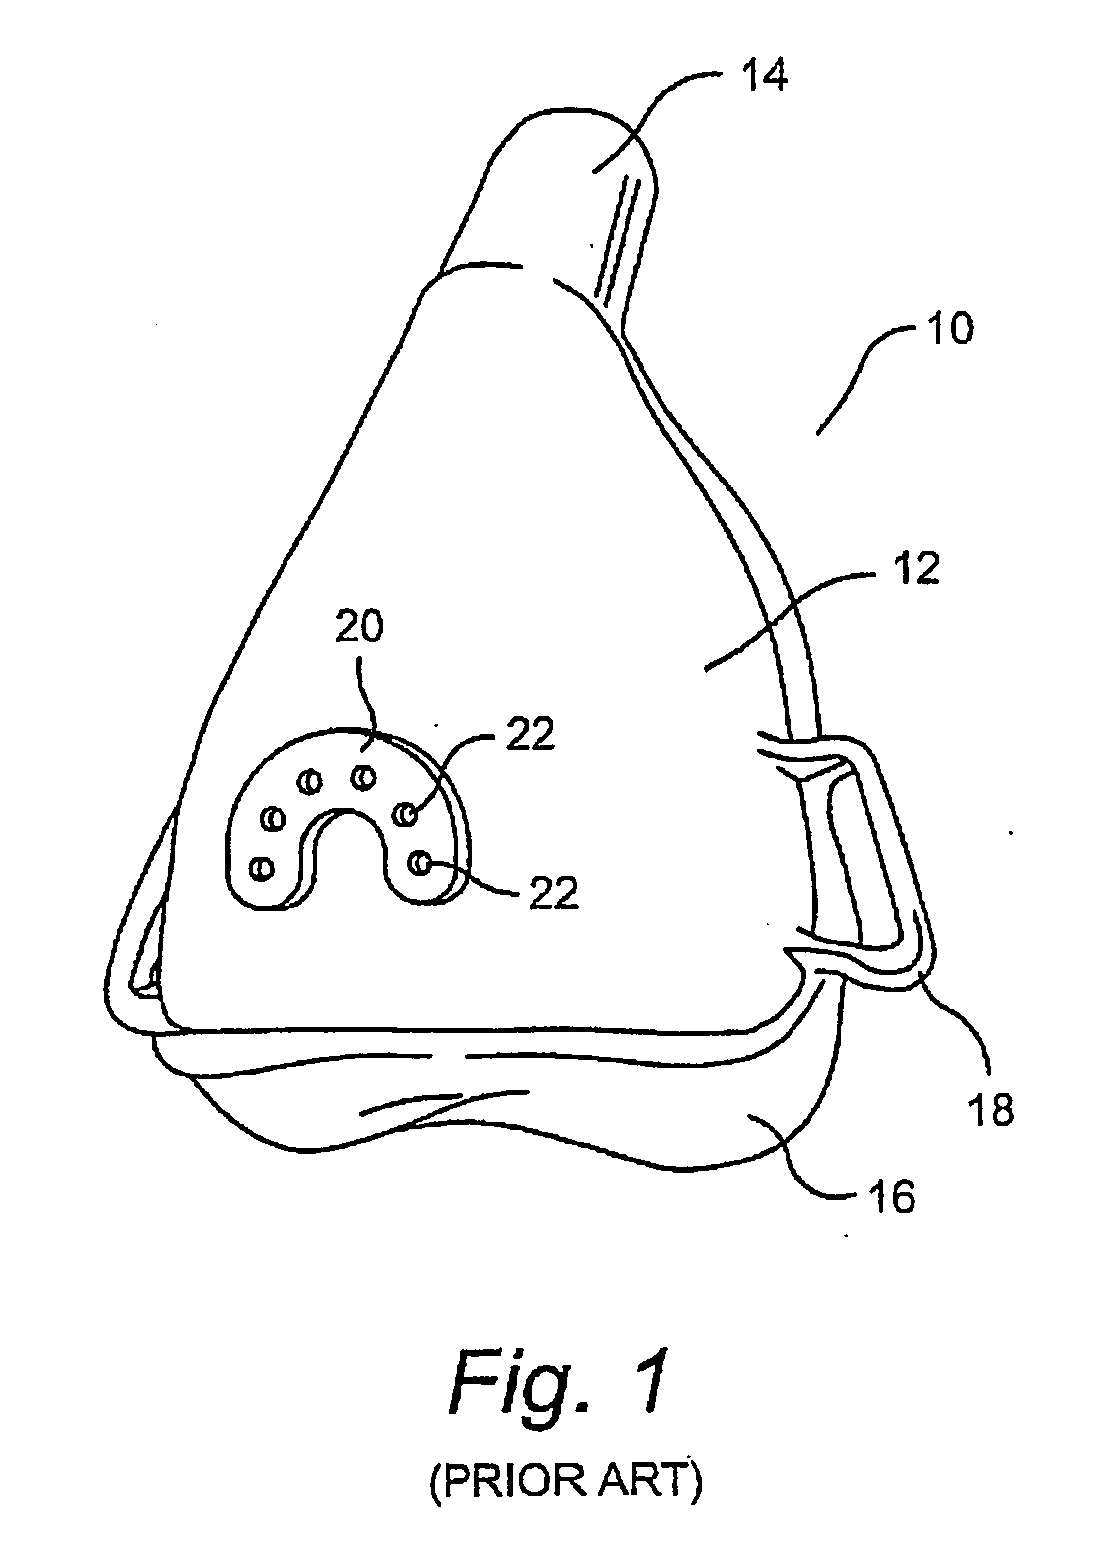 Injection control for non-invented mask